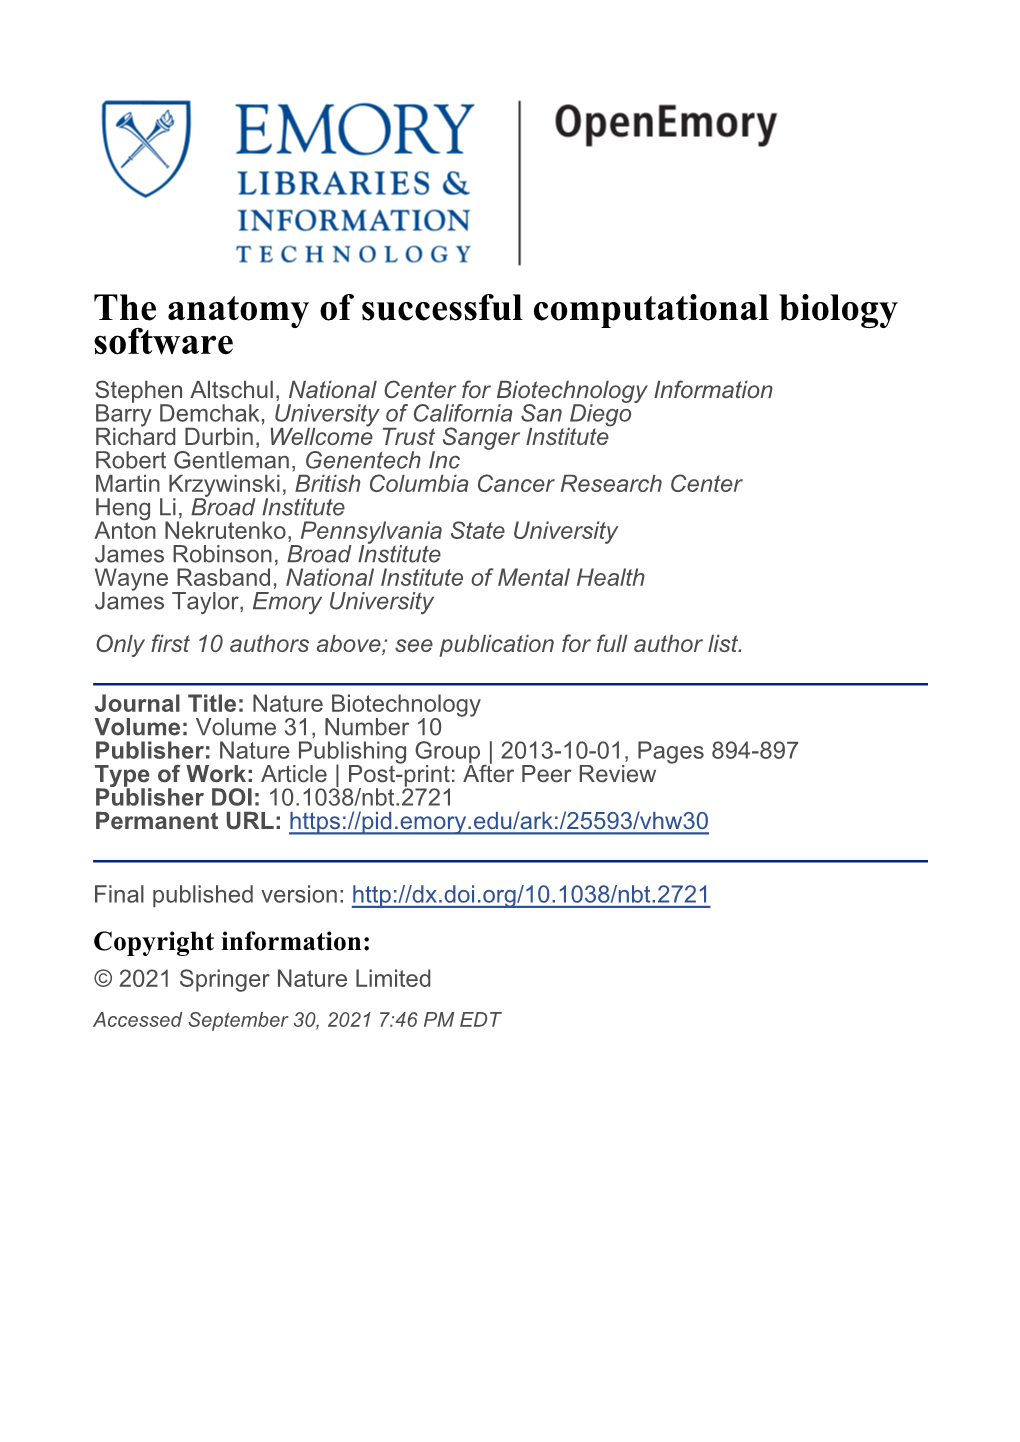 The Anatomy of Successful Computational Biology Software